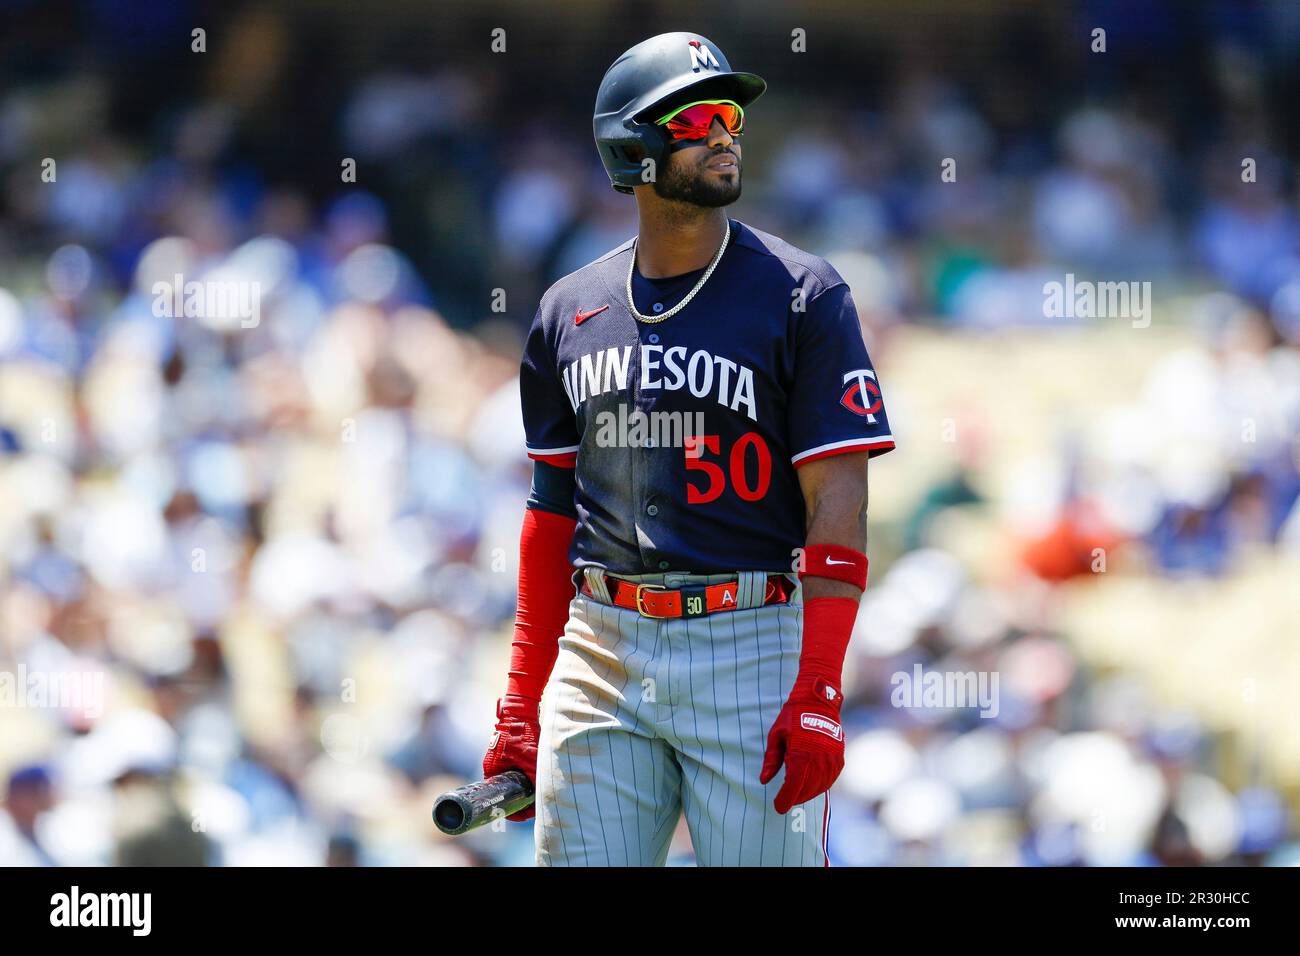 LOS ANGELES, CA - MAY 17: Minnesota Twins third basemen Willi Castro (50)  walks back to the dugout after an at bat during a regular season game  between the Minnesota Twins and